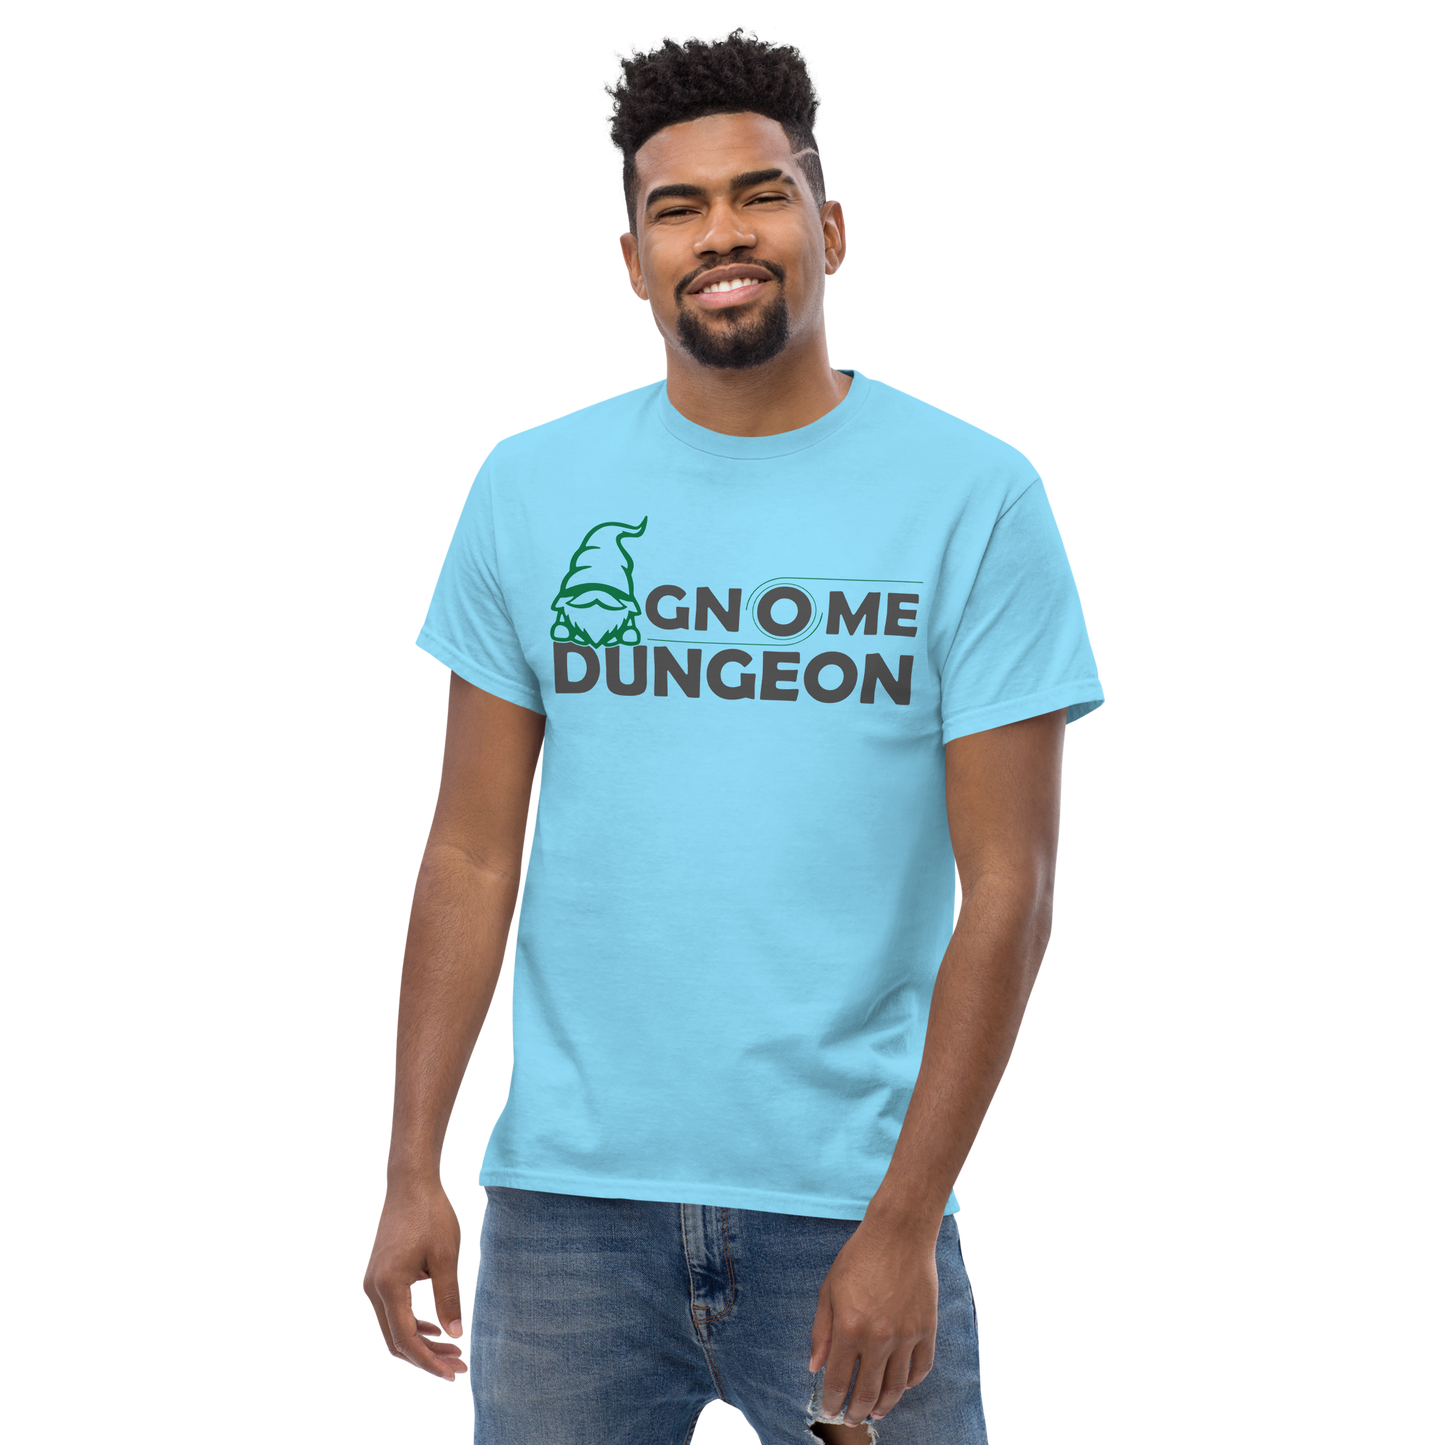 Gnome Dungeon tee